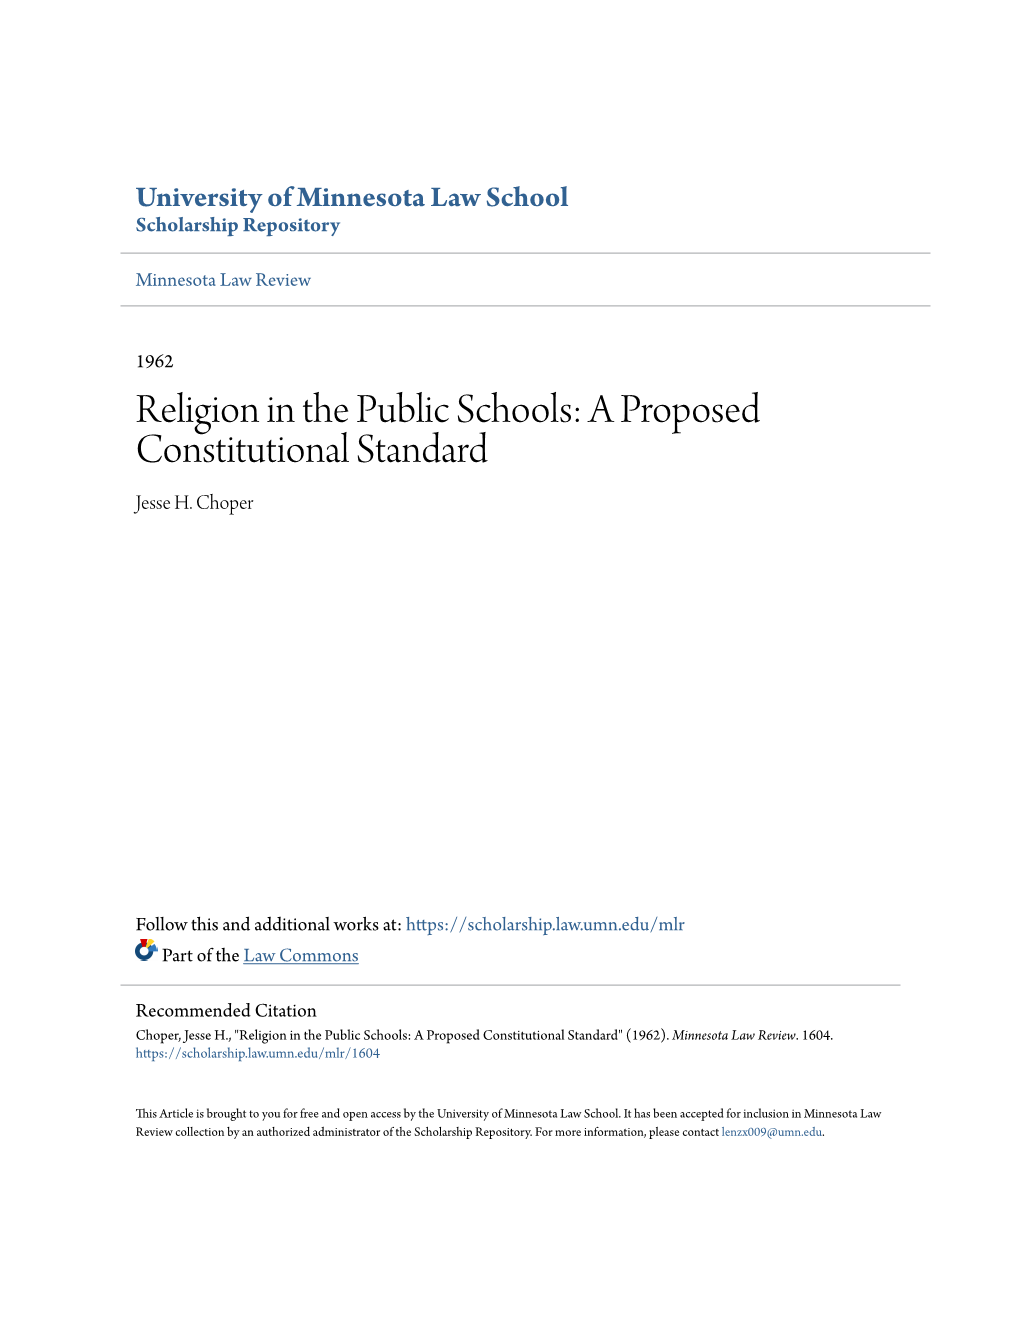 Religion in the Public Schools: a Proposed Constitutional Standard Jesse H